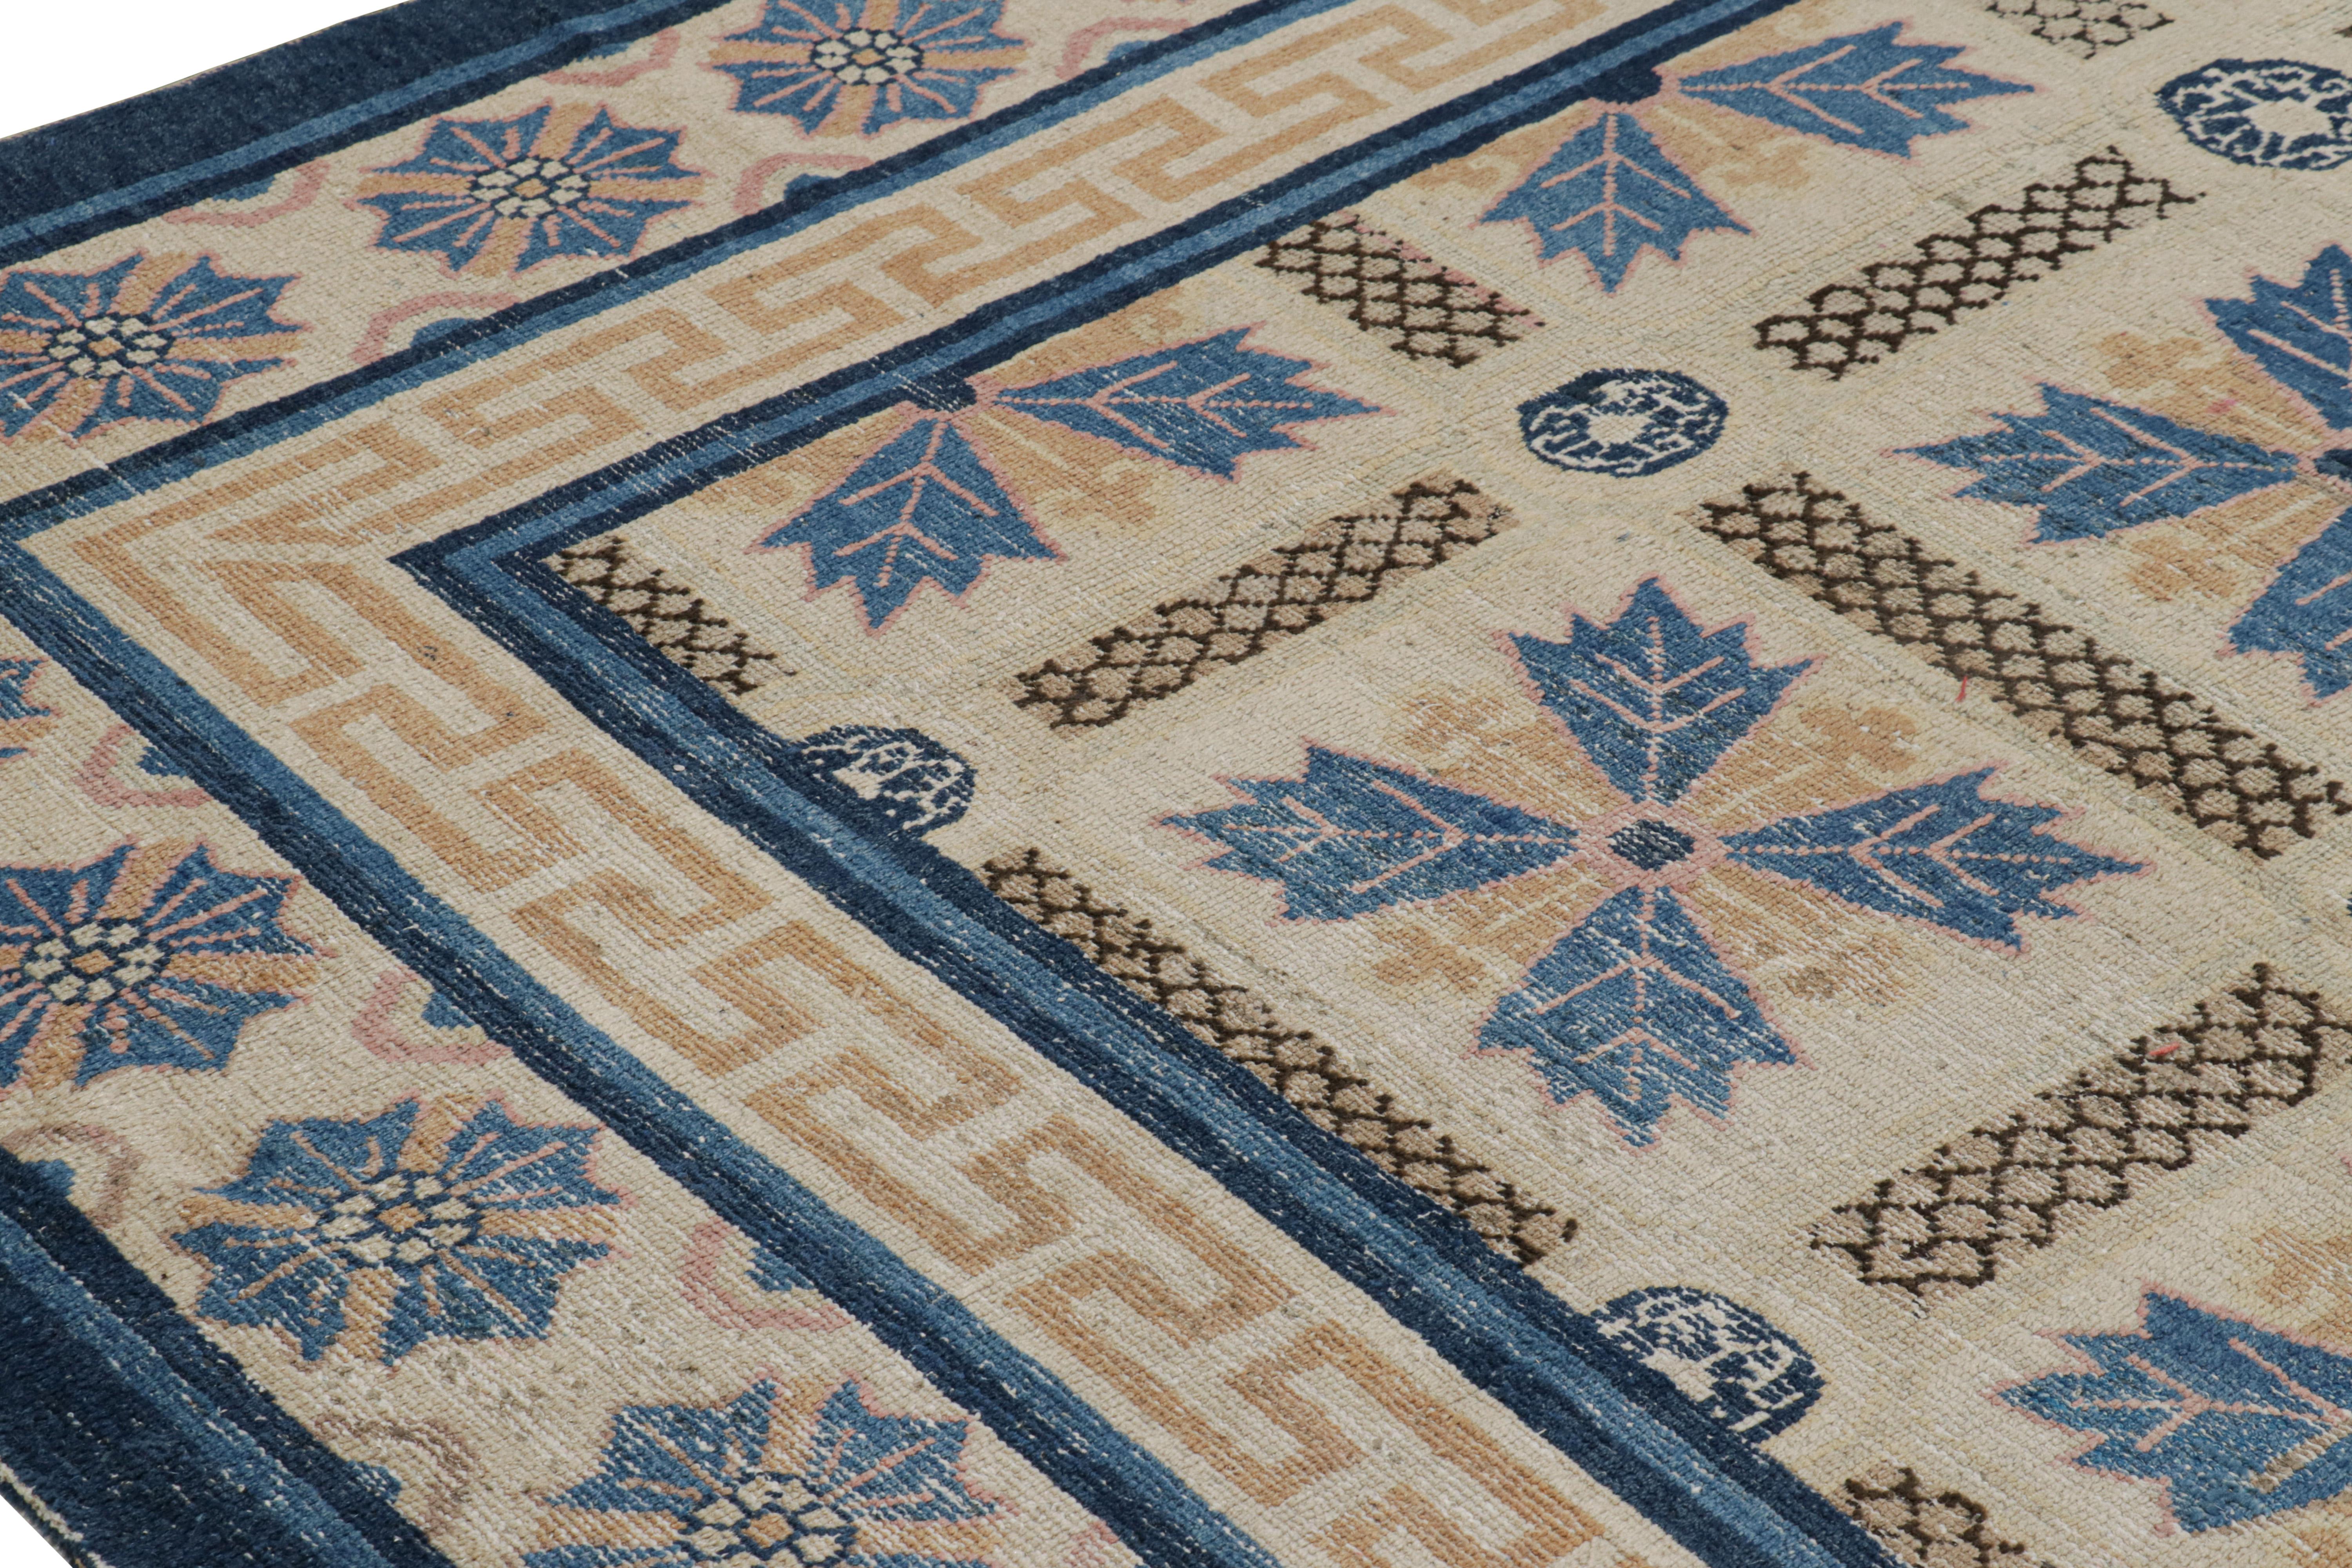 Early 20th Century Antique Ningxia Rug in Beige-Brown and Blue Floral Patterns For Sale